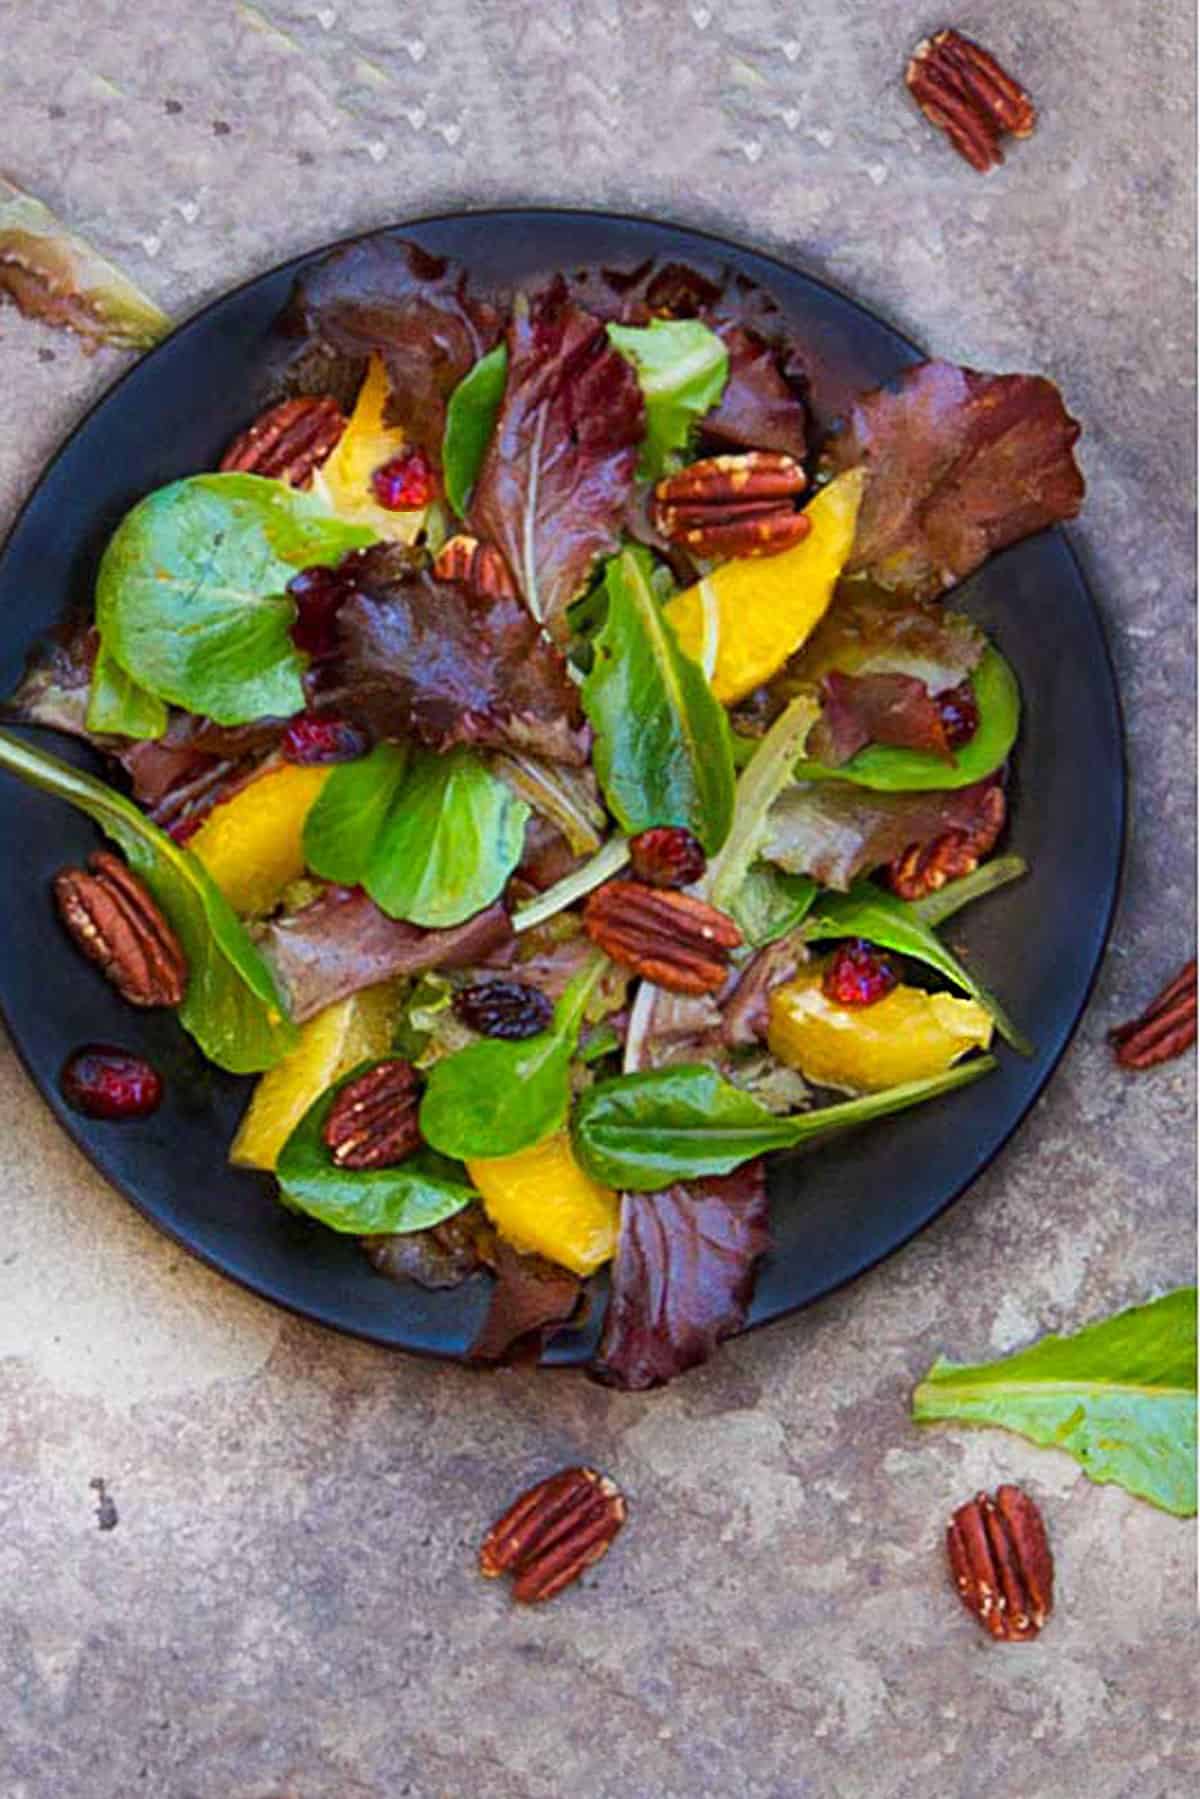 leafy salad on a small plate with baby romaine, orange segments, toasted pecans and cranberries.